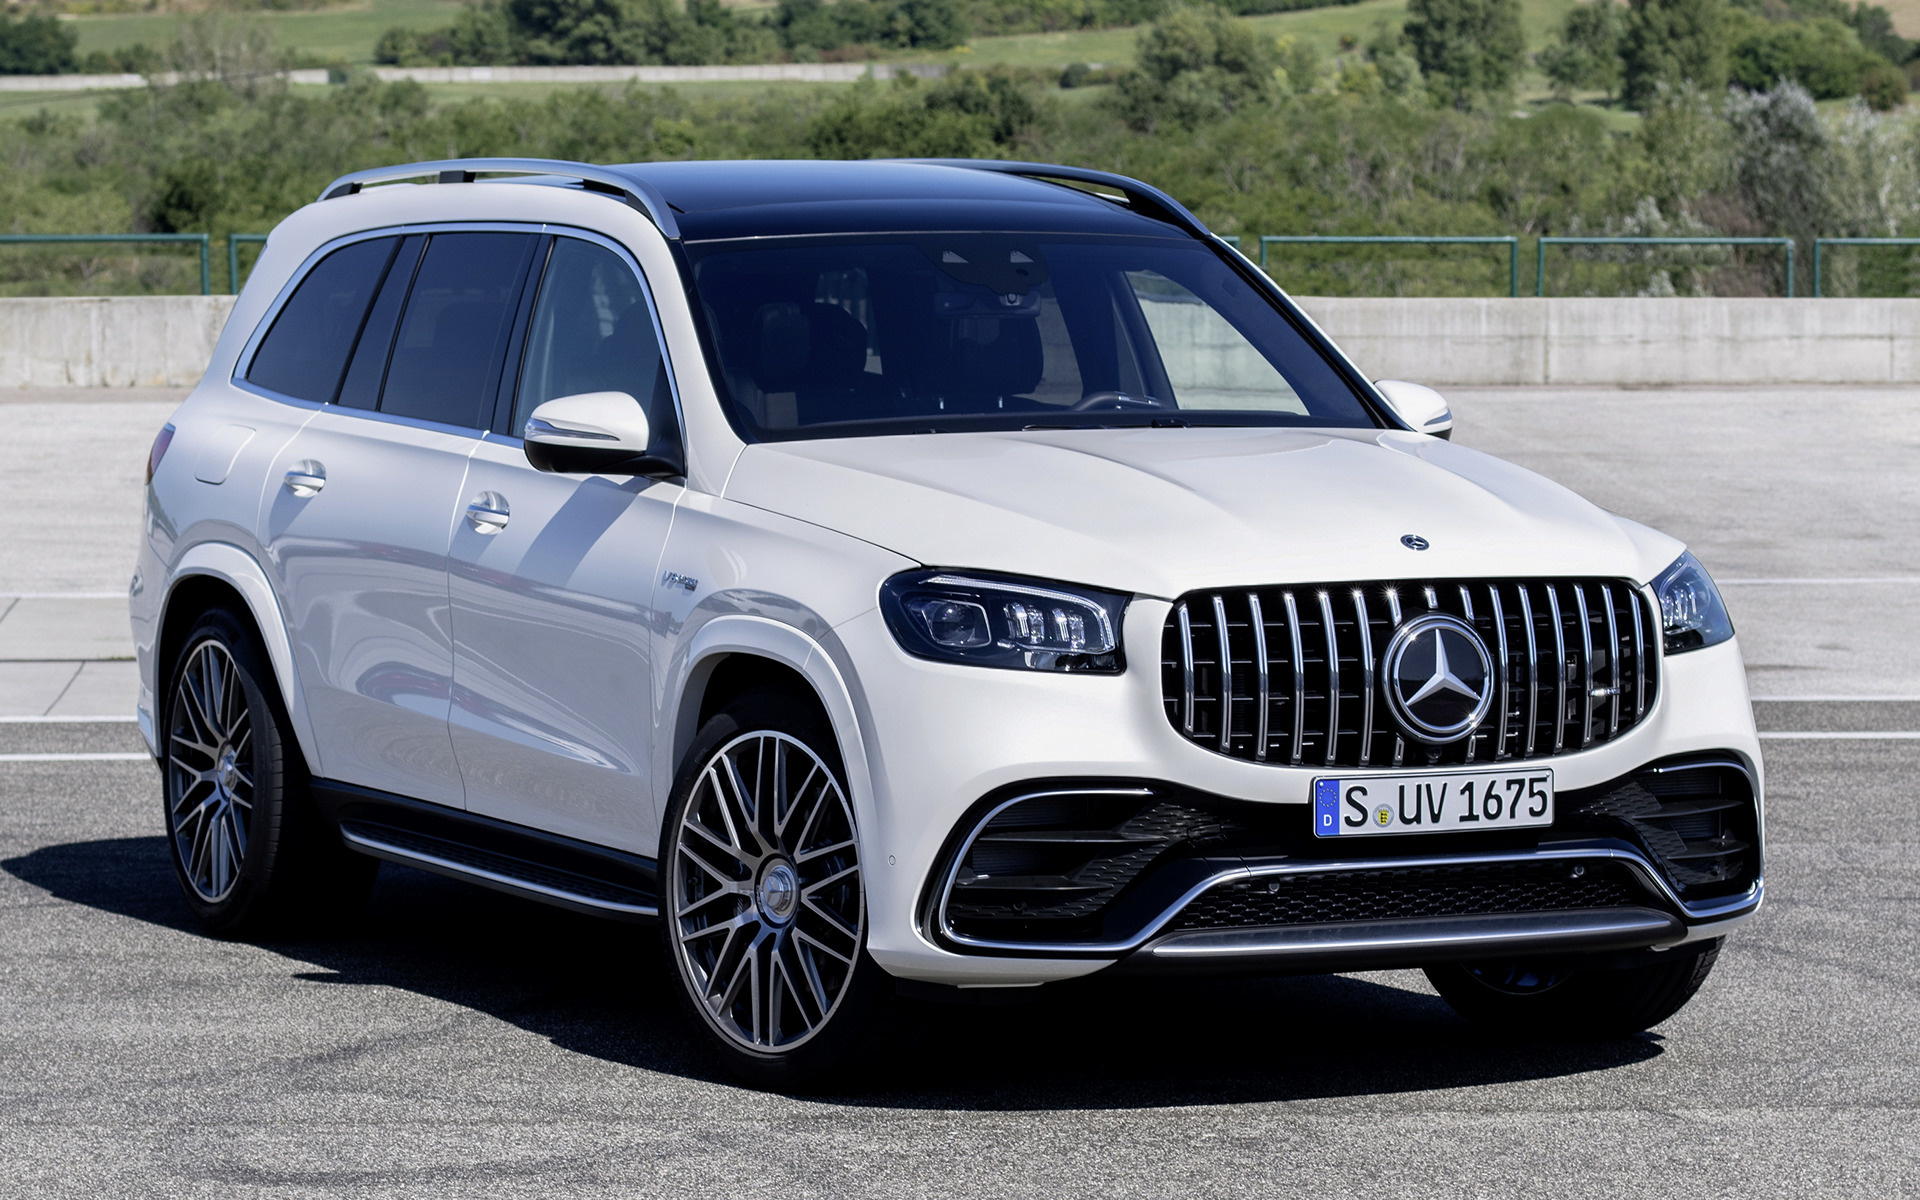 2020 Mercedes-AMG GLS 63 - Wallpapers and HD Images | Car Pixel